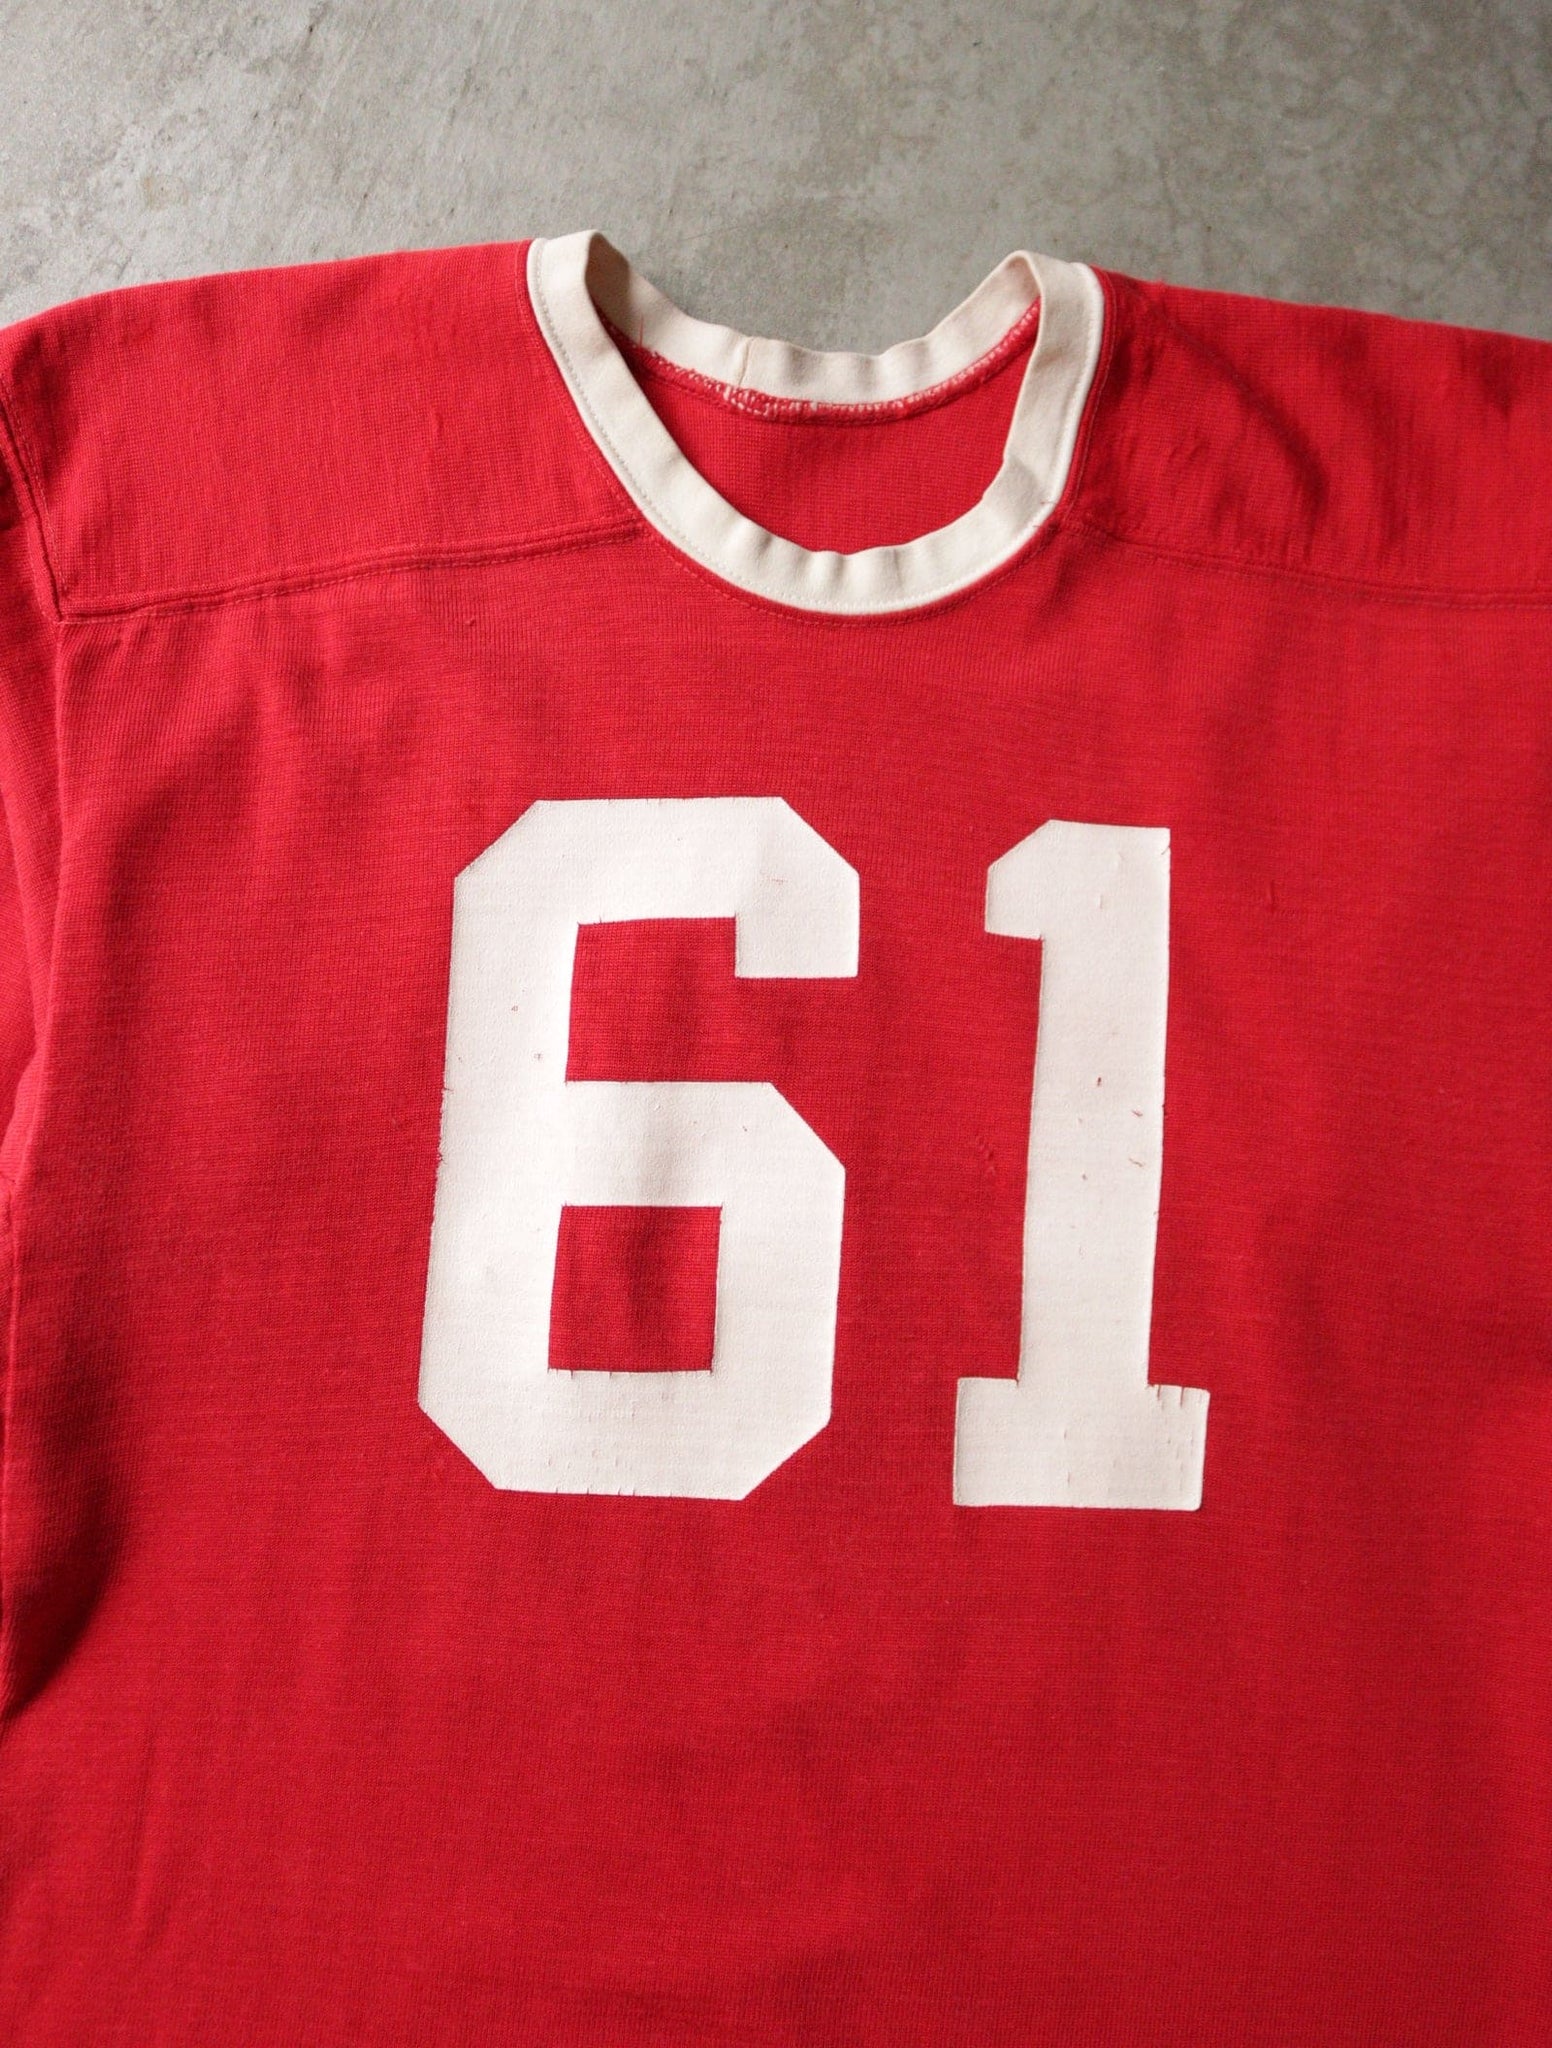 1950S 61 DISTRESSED JERSEY